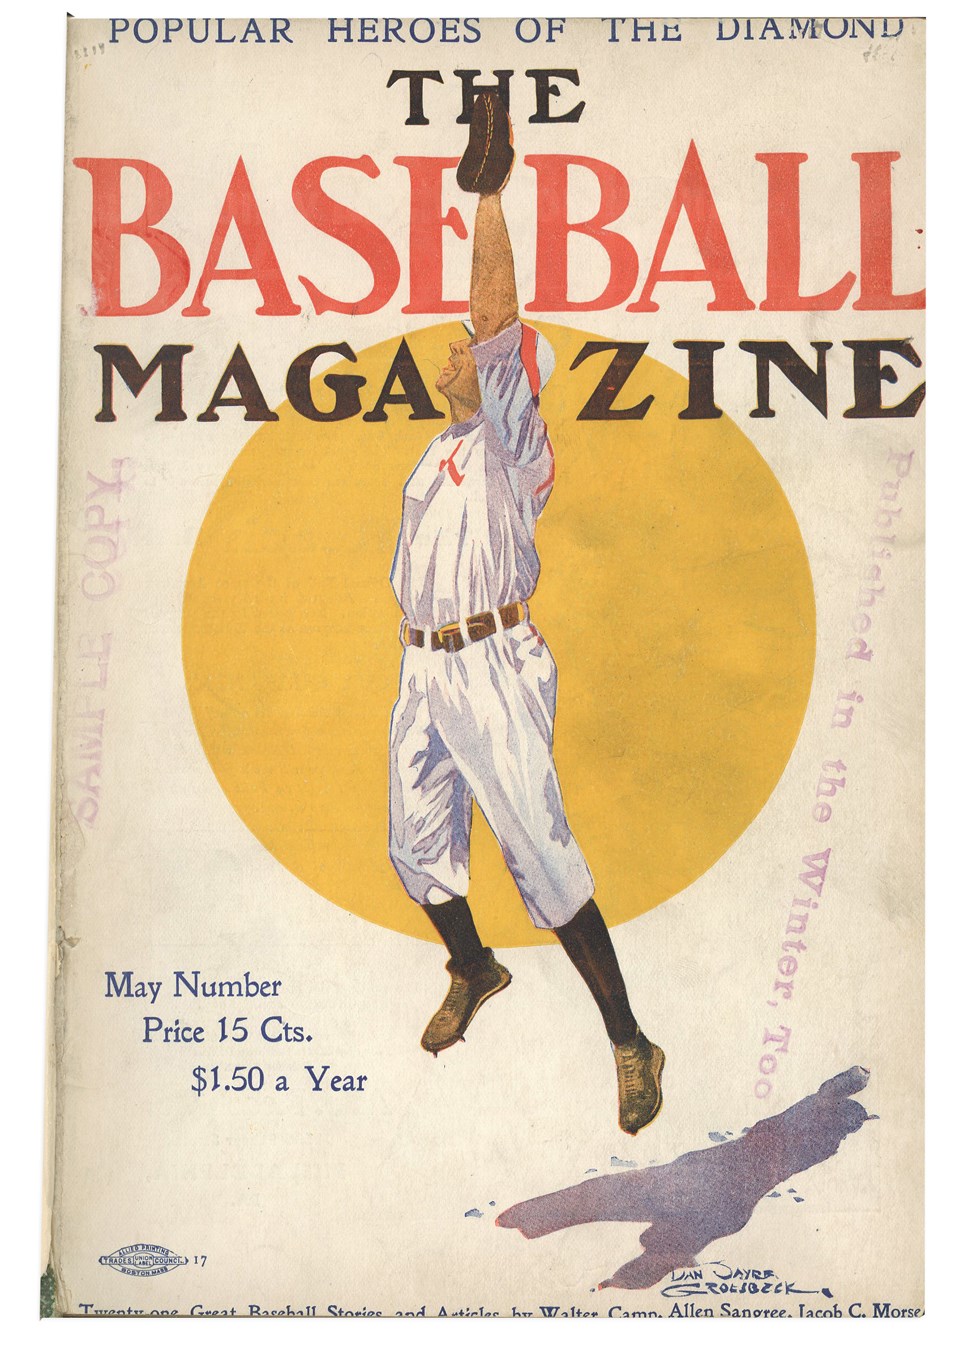 Tickets, Publications & Pins - FIRST EVER 1908 Baseball Magazine Presentation Volume w/Rare Issue #1 - Inscribed by President to Boston B.B.C. Captain John Morill